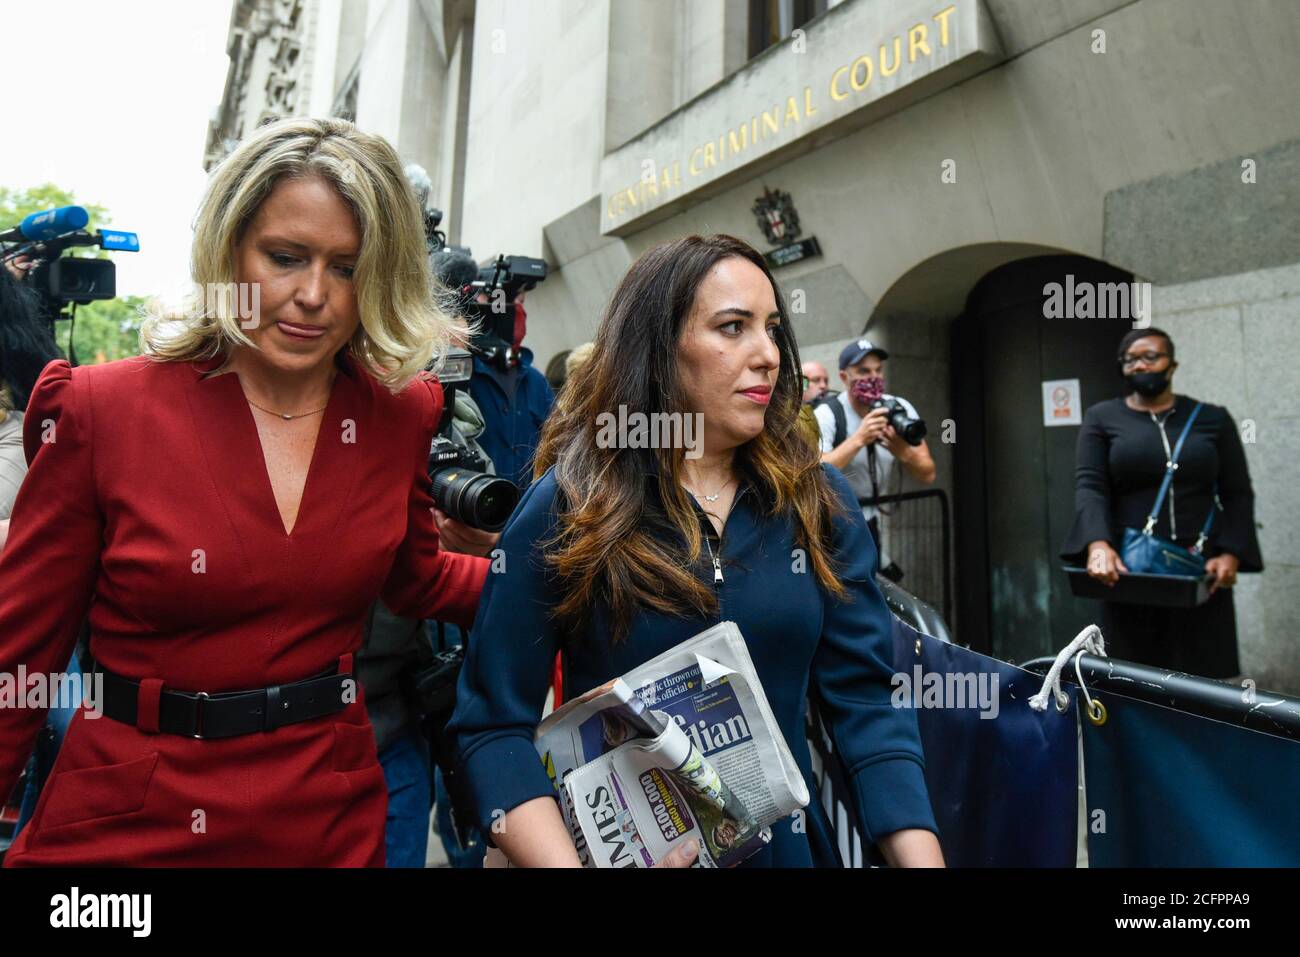 London, UK.  7 September 2020. Julian Assange’s lawyer, Jennifer Robinson (L) and fiancée, Stella Moris (C), arrive at the Old Bailey as Julian Assange's extradition hearing, which is expected to last for the next three or four weeks, resumes after it was postponed due to the coronavirus pandemic lockdown.  Julian Assange is wanted in the US for allegedly conspiring with army intelligence analyst Chelsea Manning to expose military secrets in 2010.  Credit: Stephen Chung / Alamy Live News Stock Photo